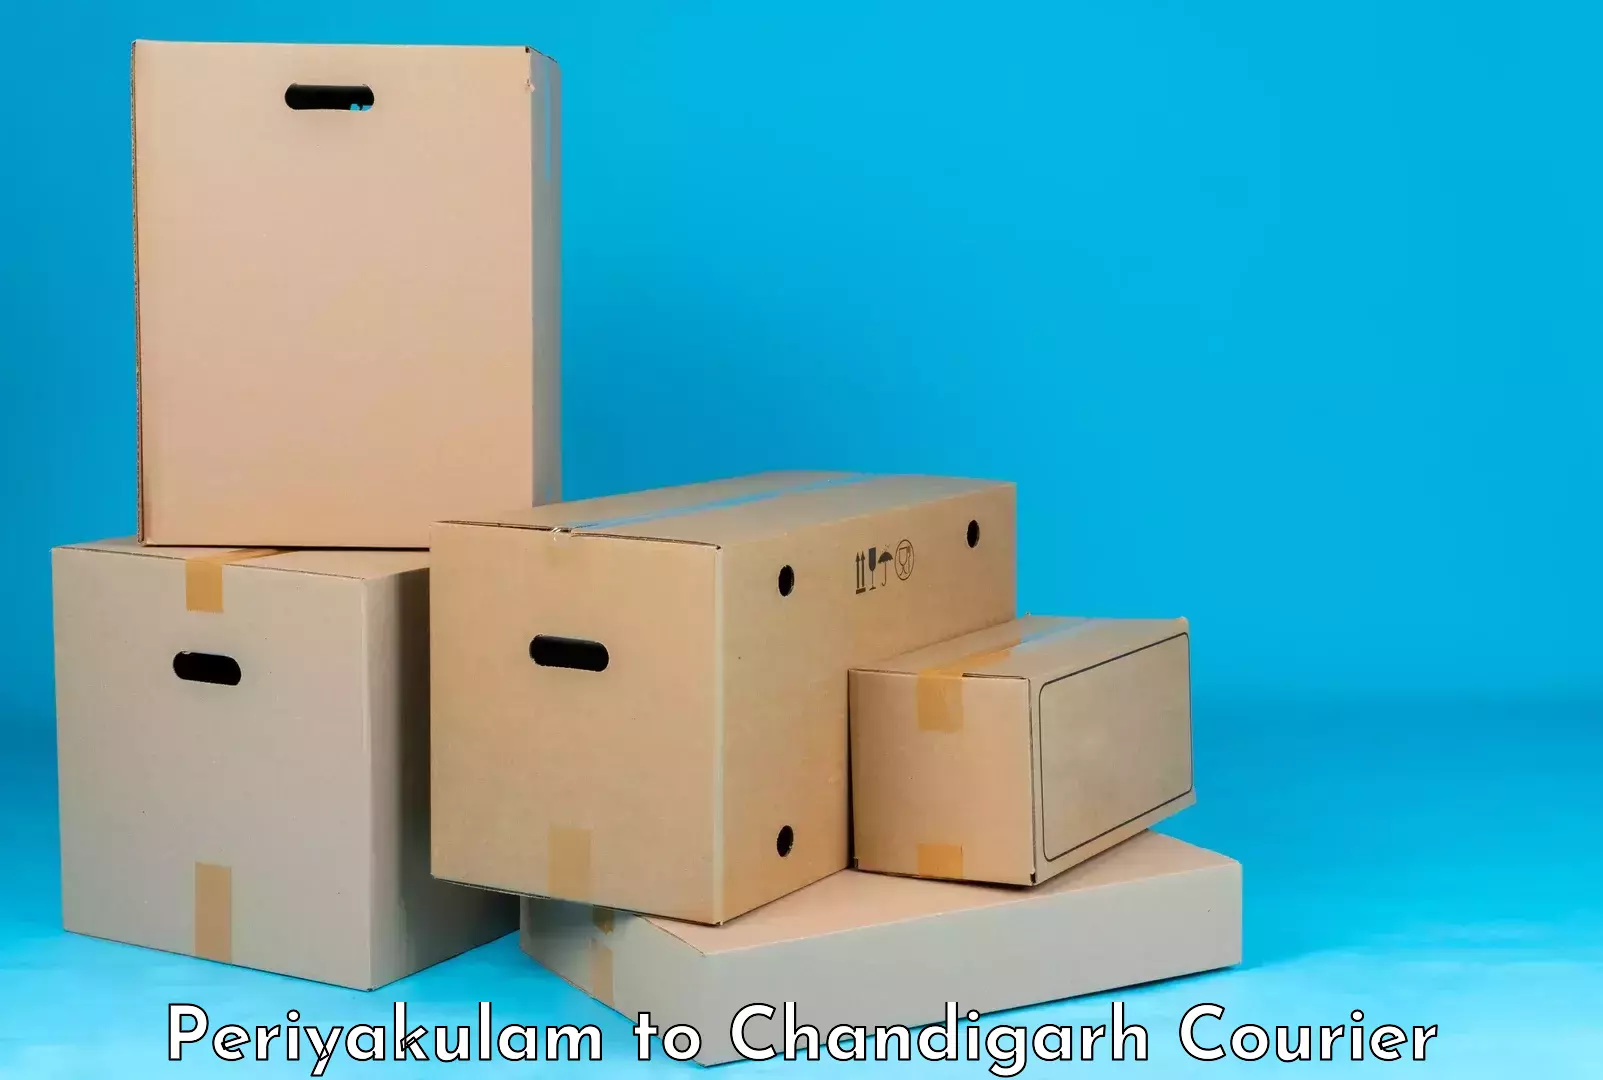 Luggage delivery system Periyakulam to Chandigarh